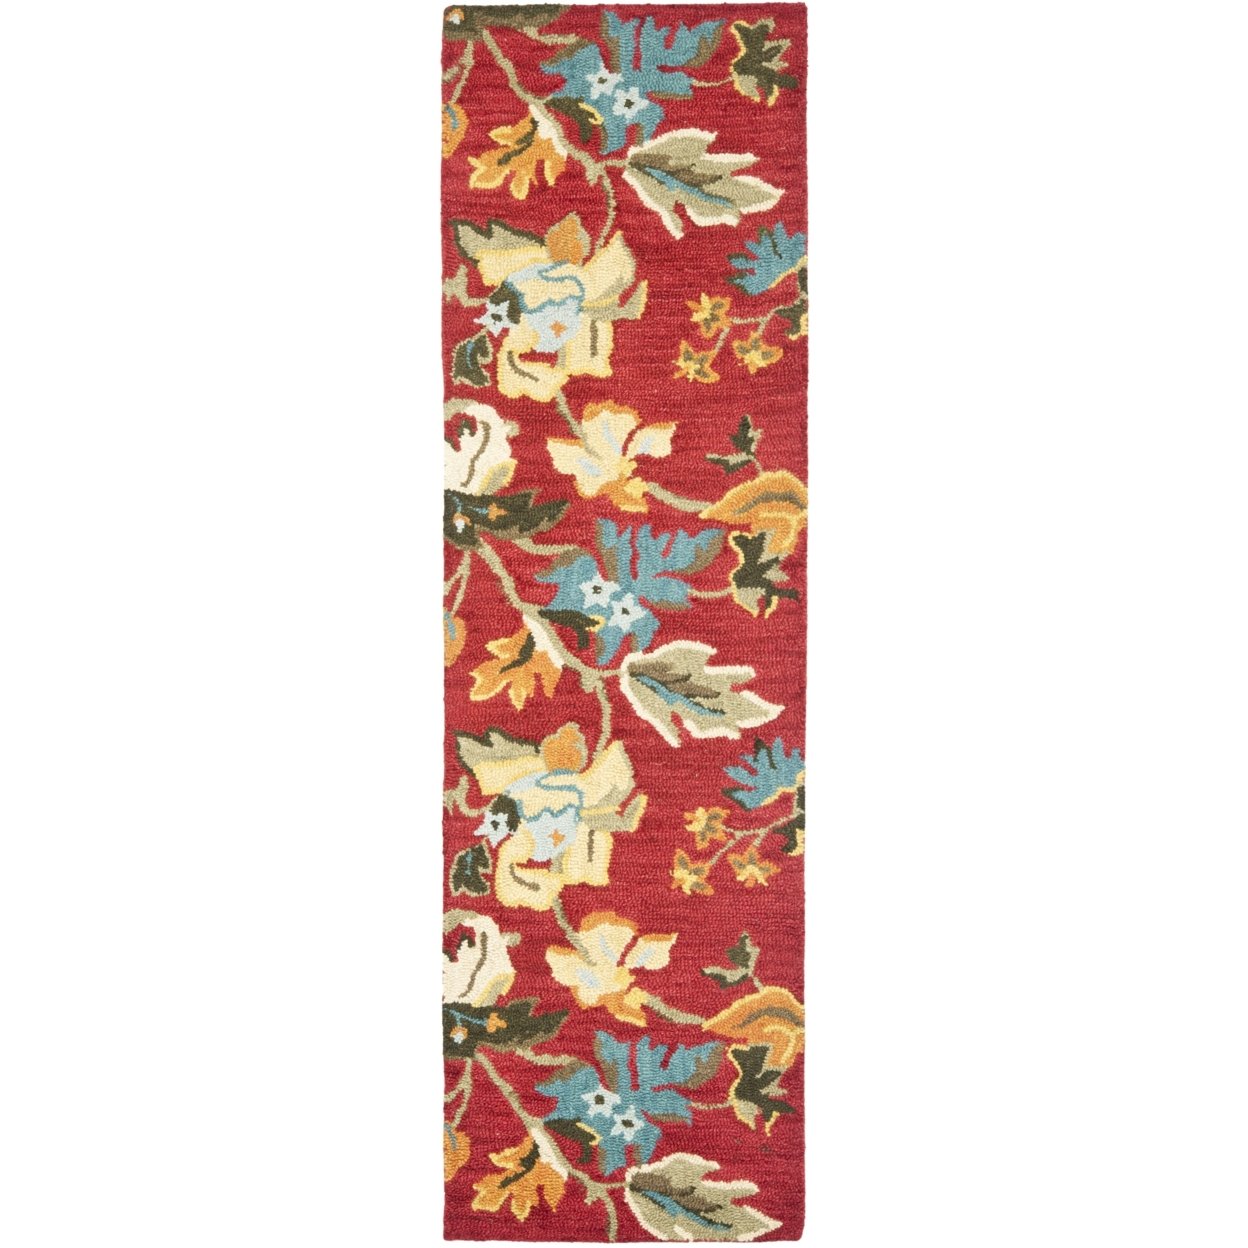 SAFAVIEH Blossom BLM672A Hand-hooked Red / Multi Rug - 2' 3 X 8'